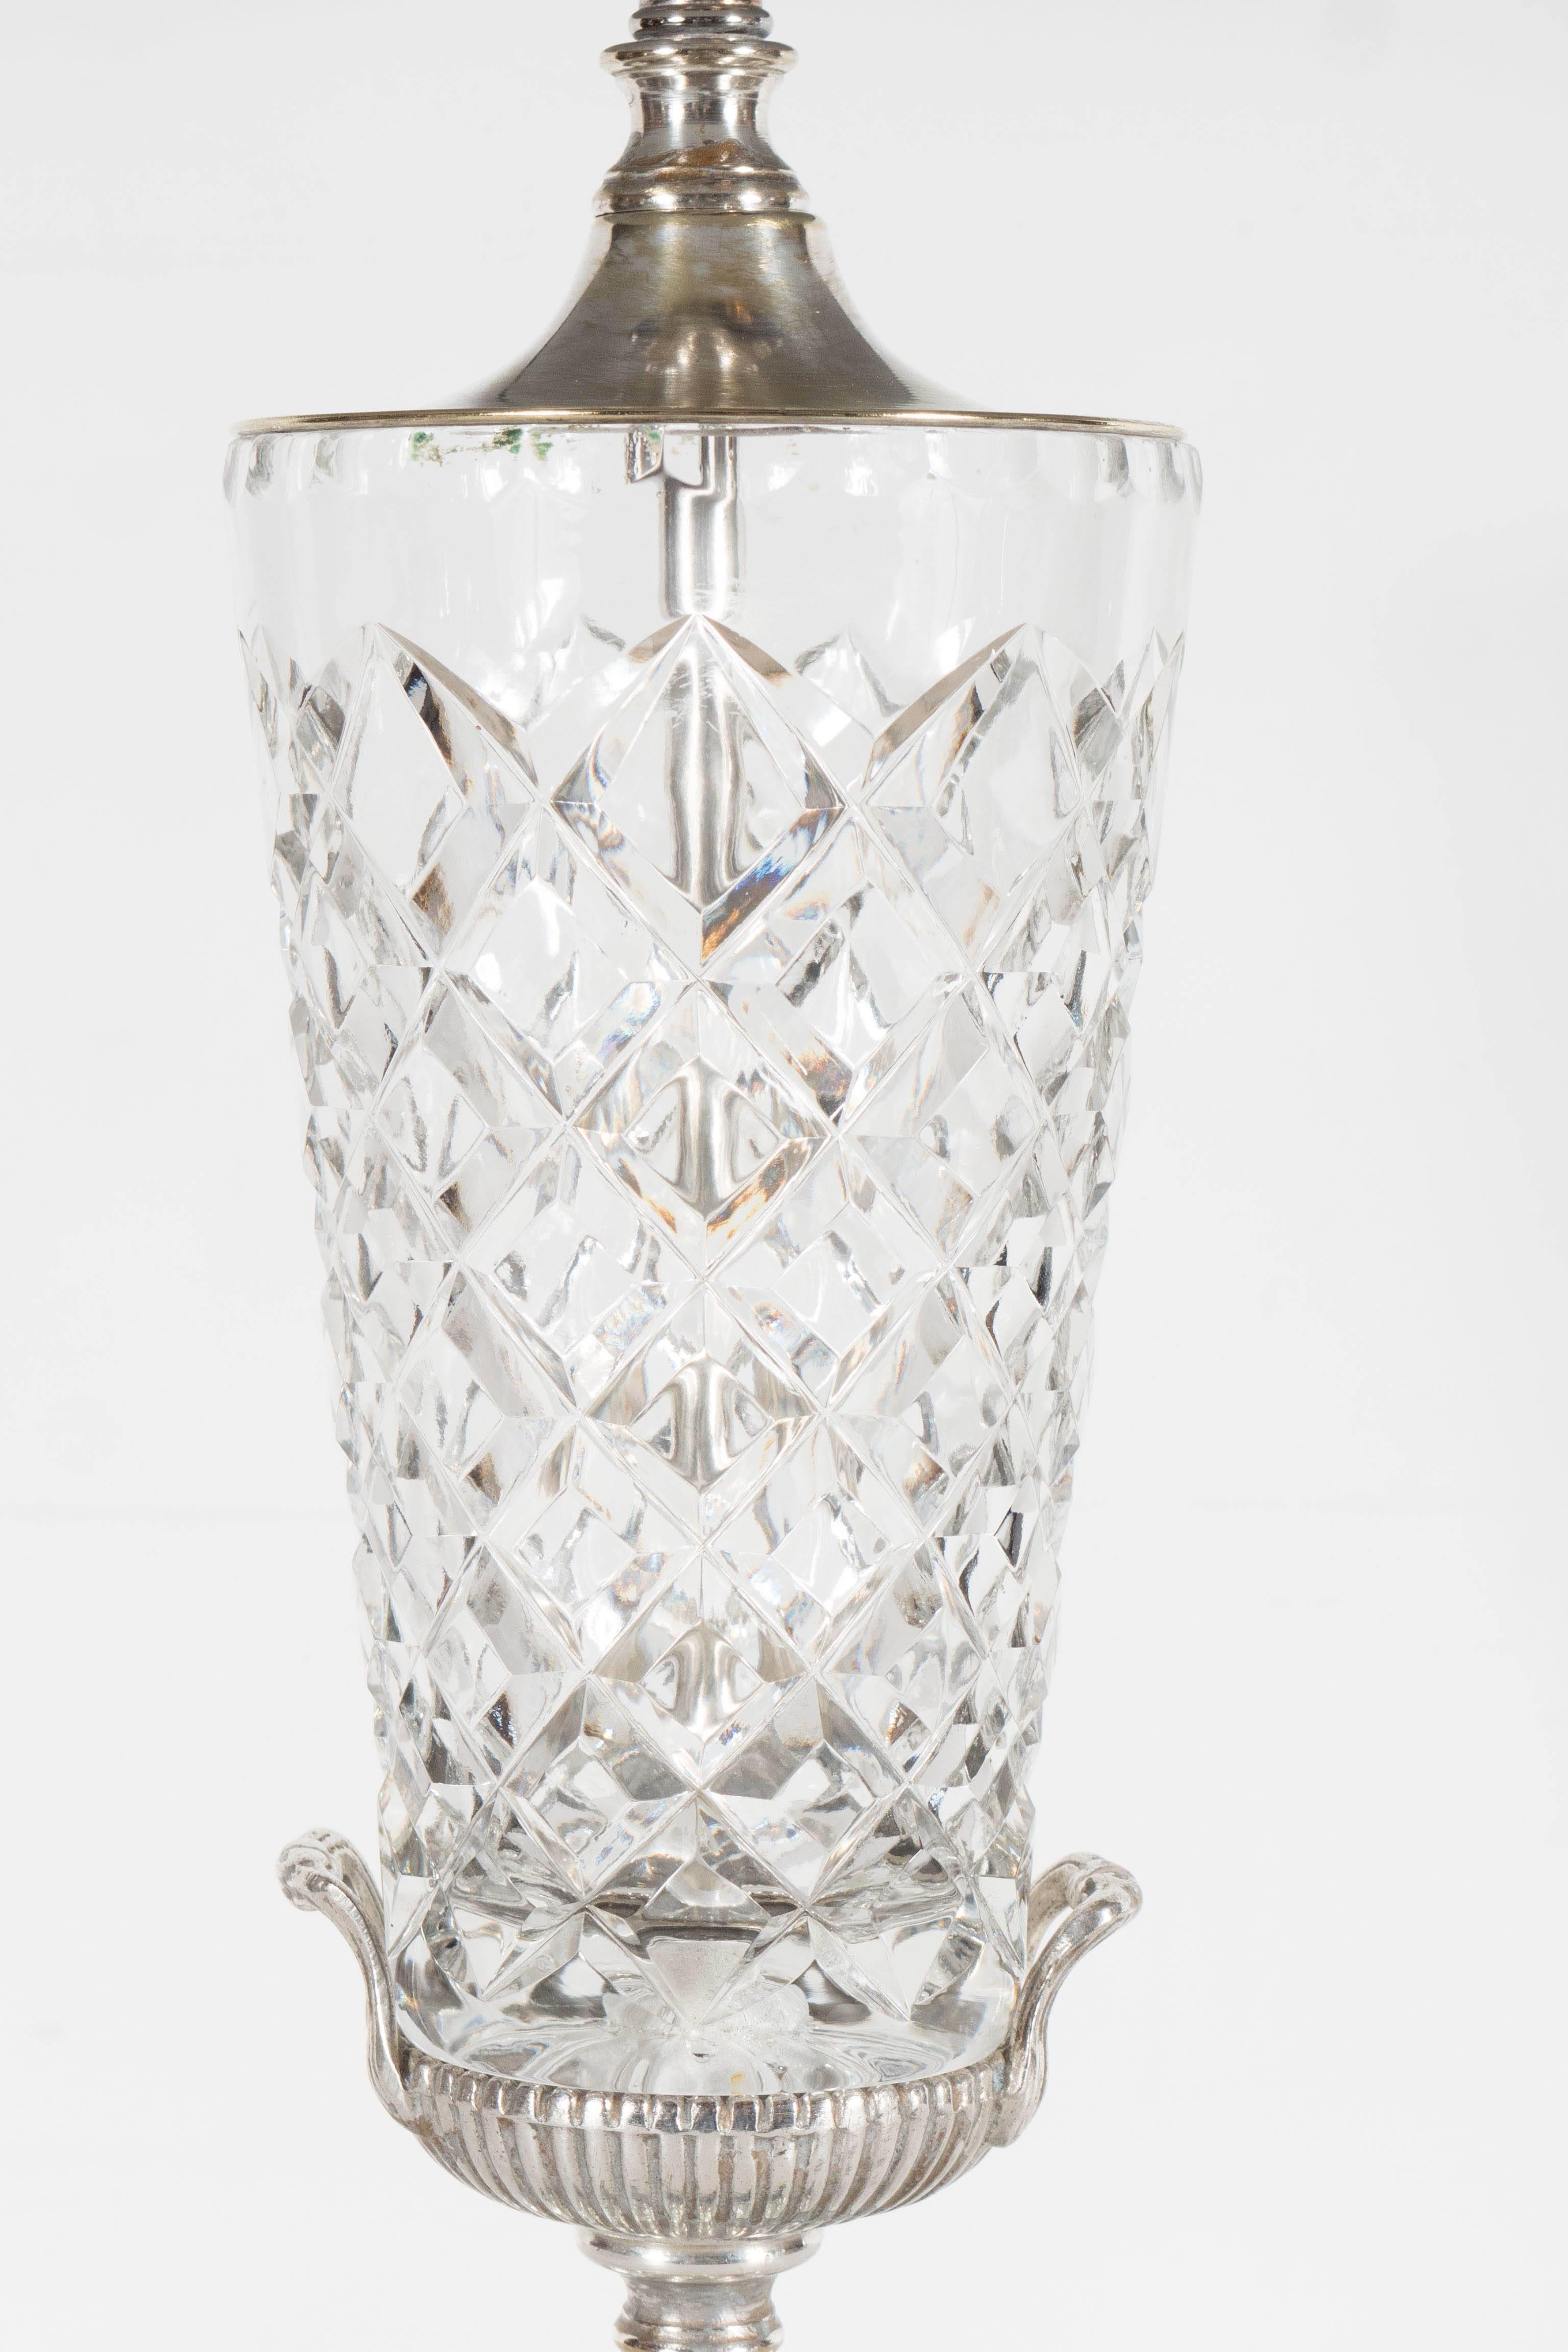 American 1940s Hollywood Cut Crystal Urn Form Table Lamp with Silvered Fittings